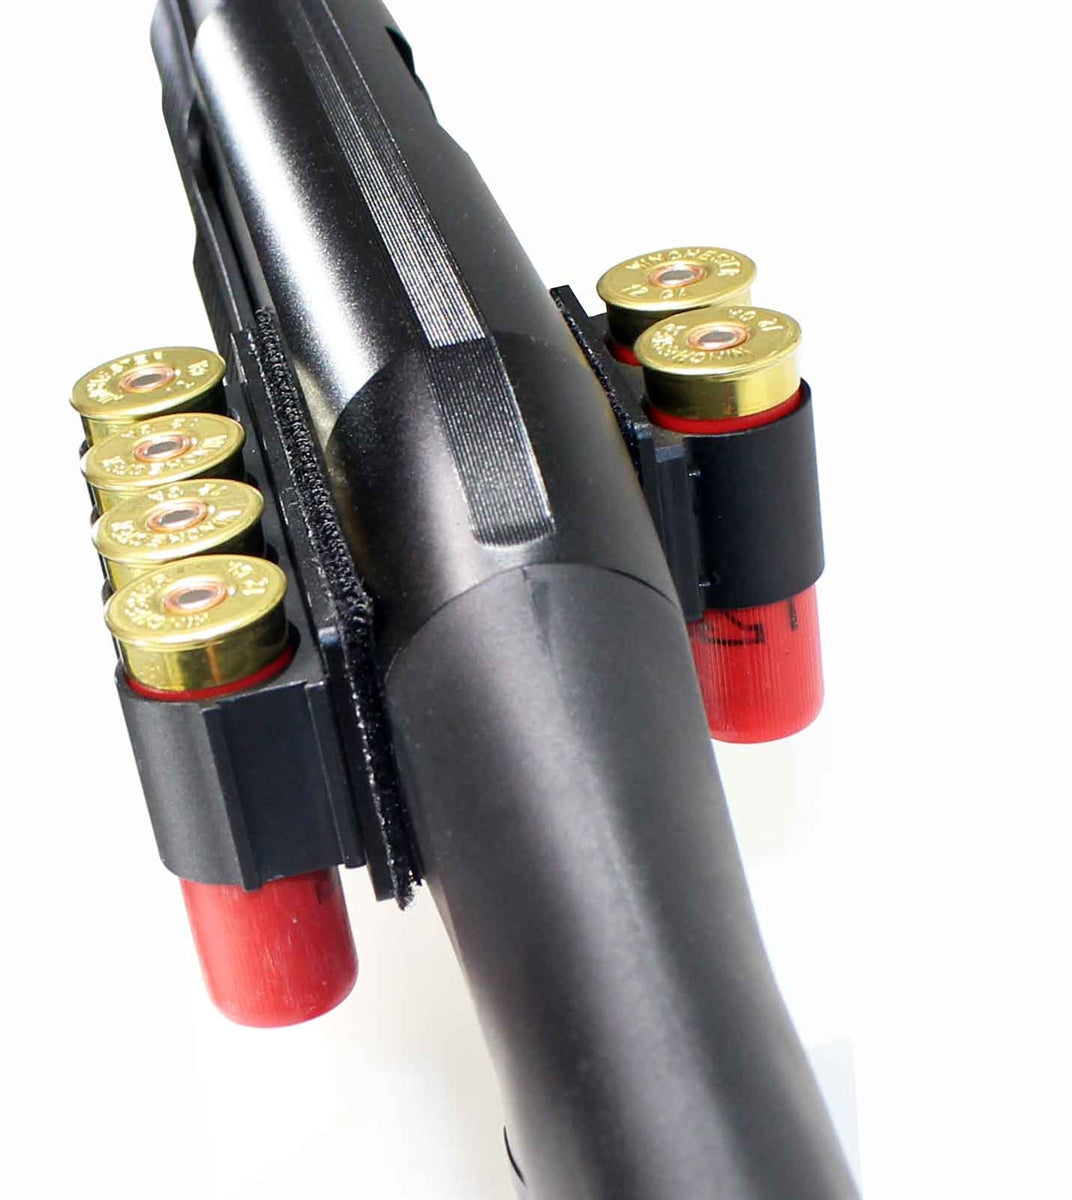 savage arms 320 model shell holder.